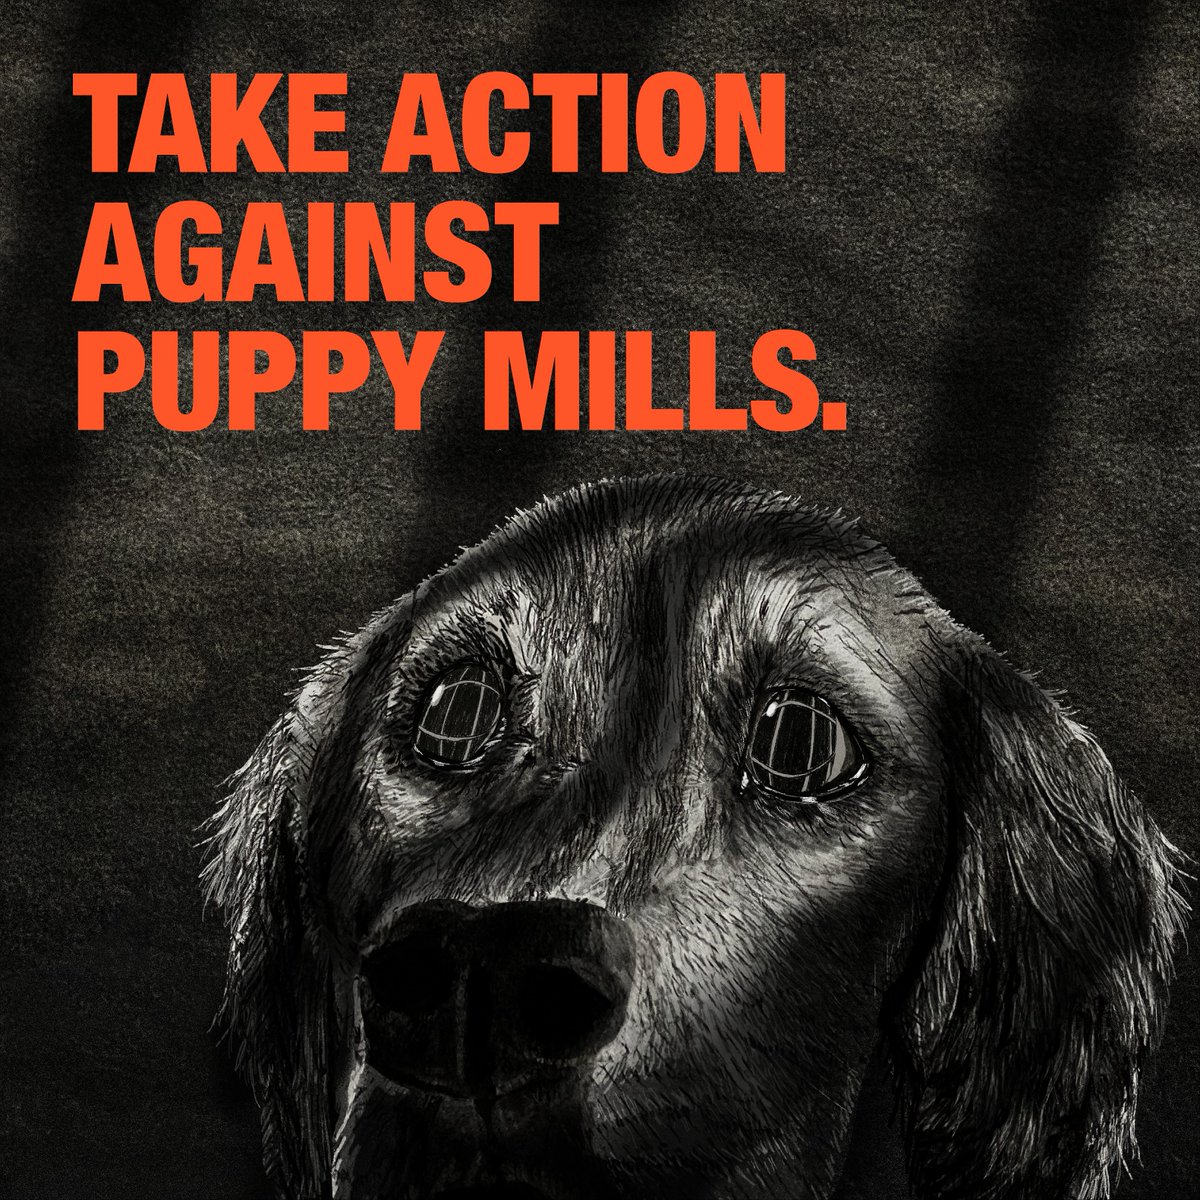 Re-tweet if you want to #EndPuppyMills! Goldie was forced to produce puppies for profit. She died in a USDA-licensed breeding facility without love, care, or help. In honor of Goldie, we urge Congress to pass #GoldiesAct! Take action here: aspca.org/goldiesact